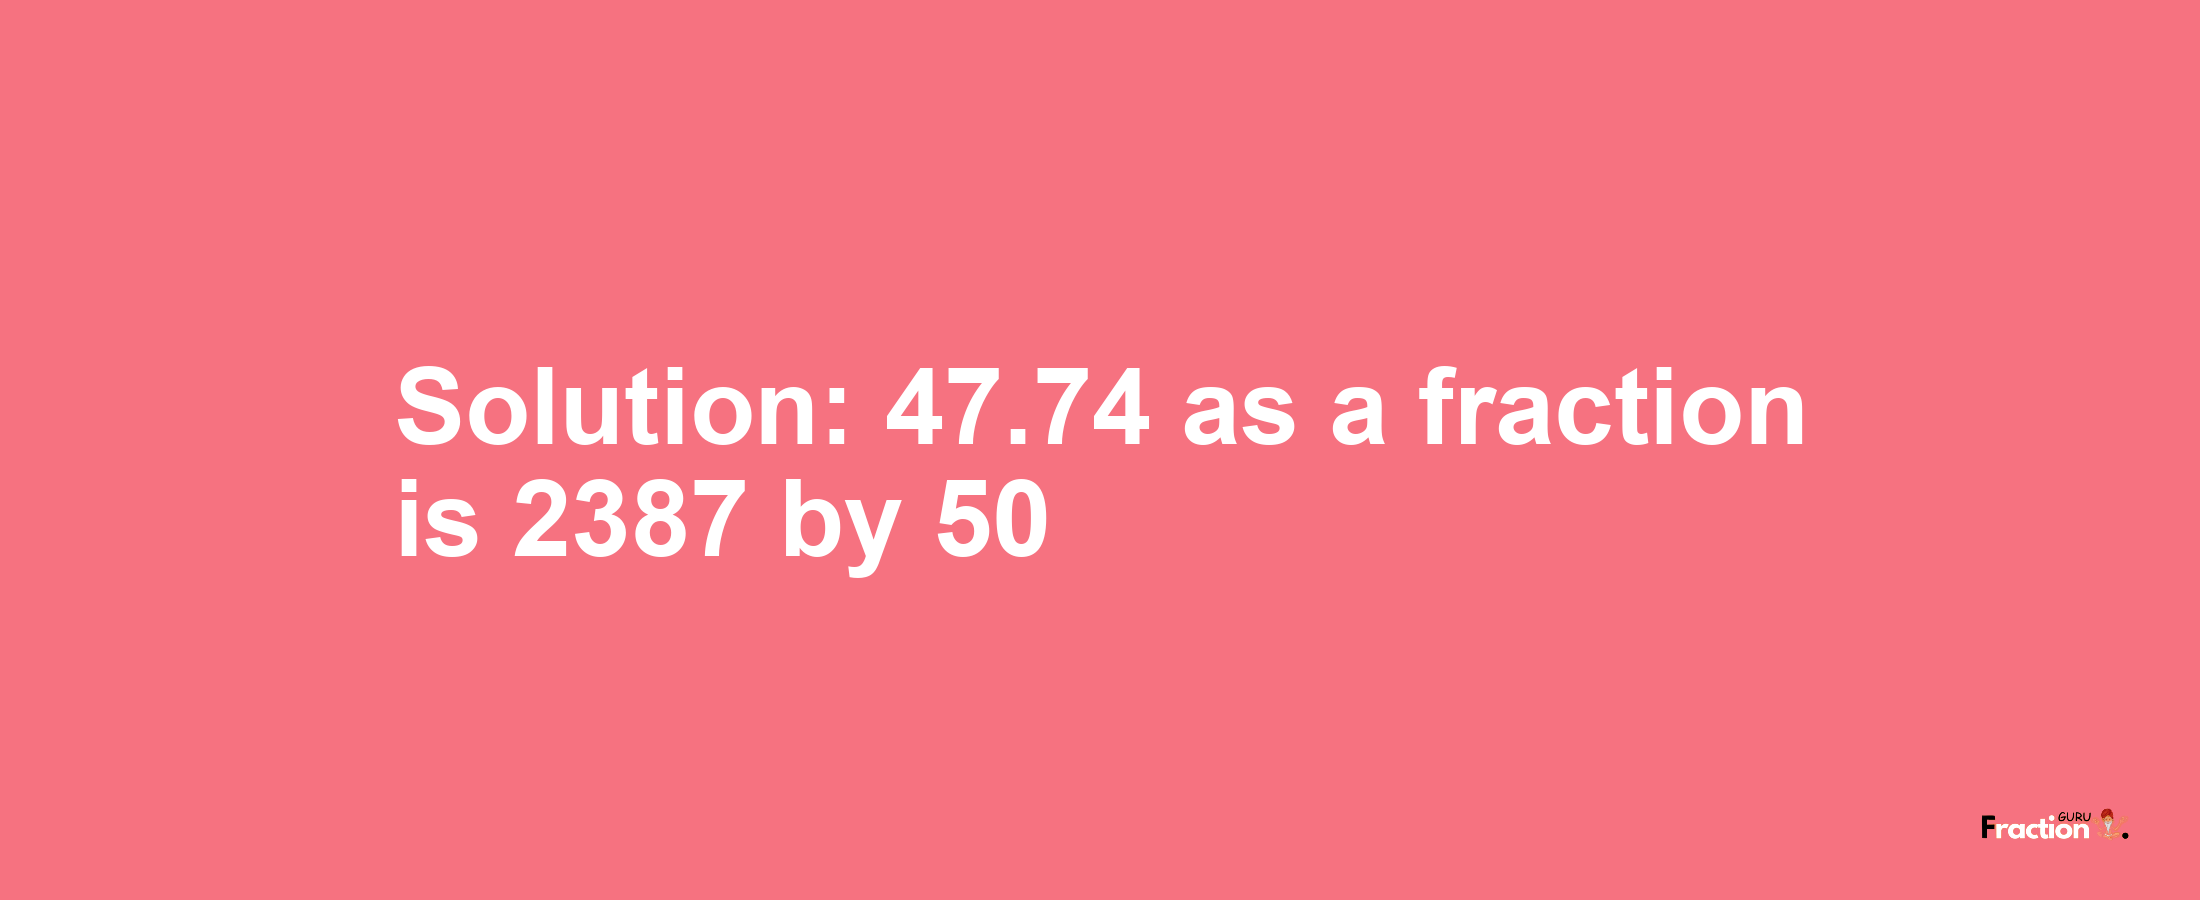 Solution:47.74 as a fraction is 2387/50